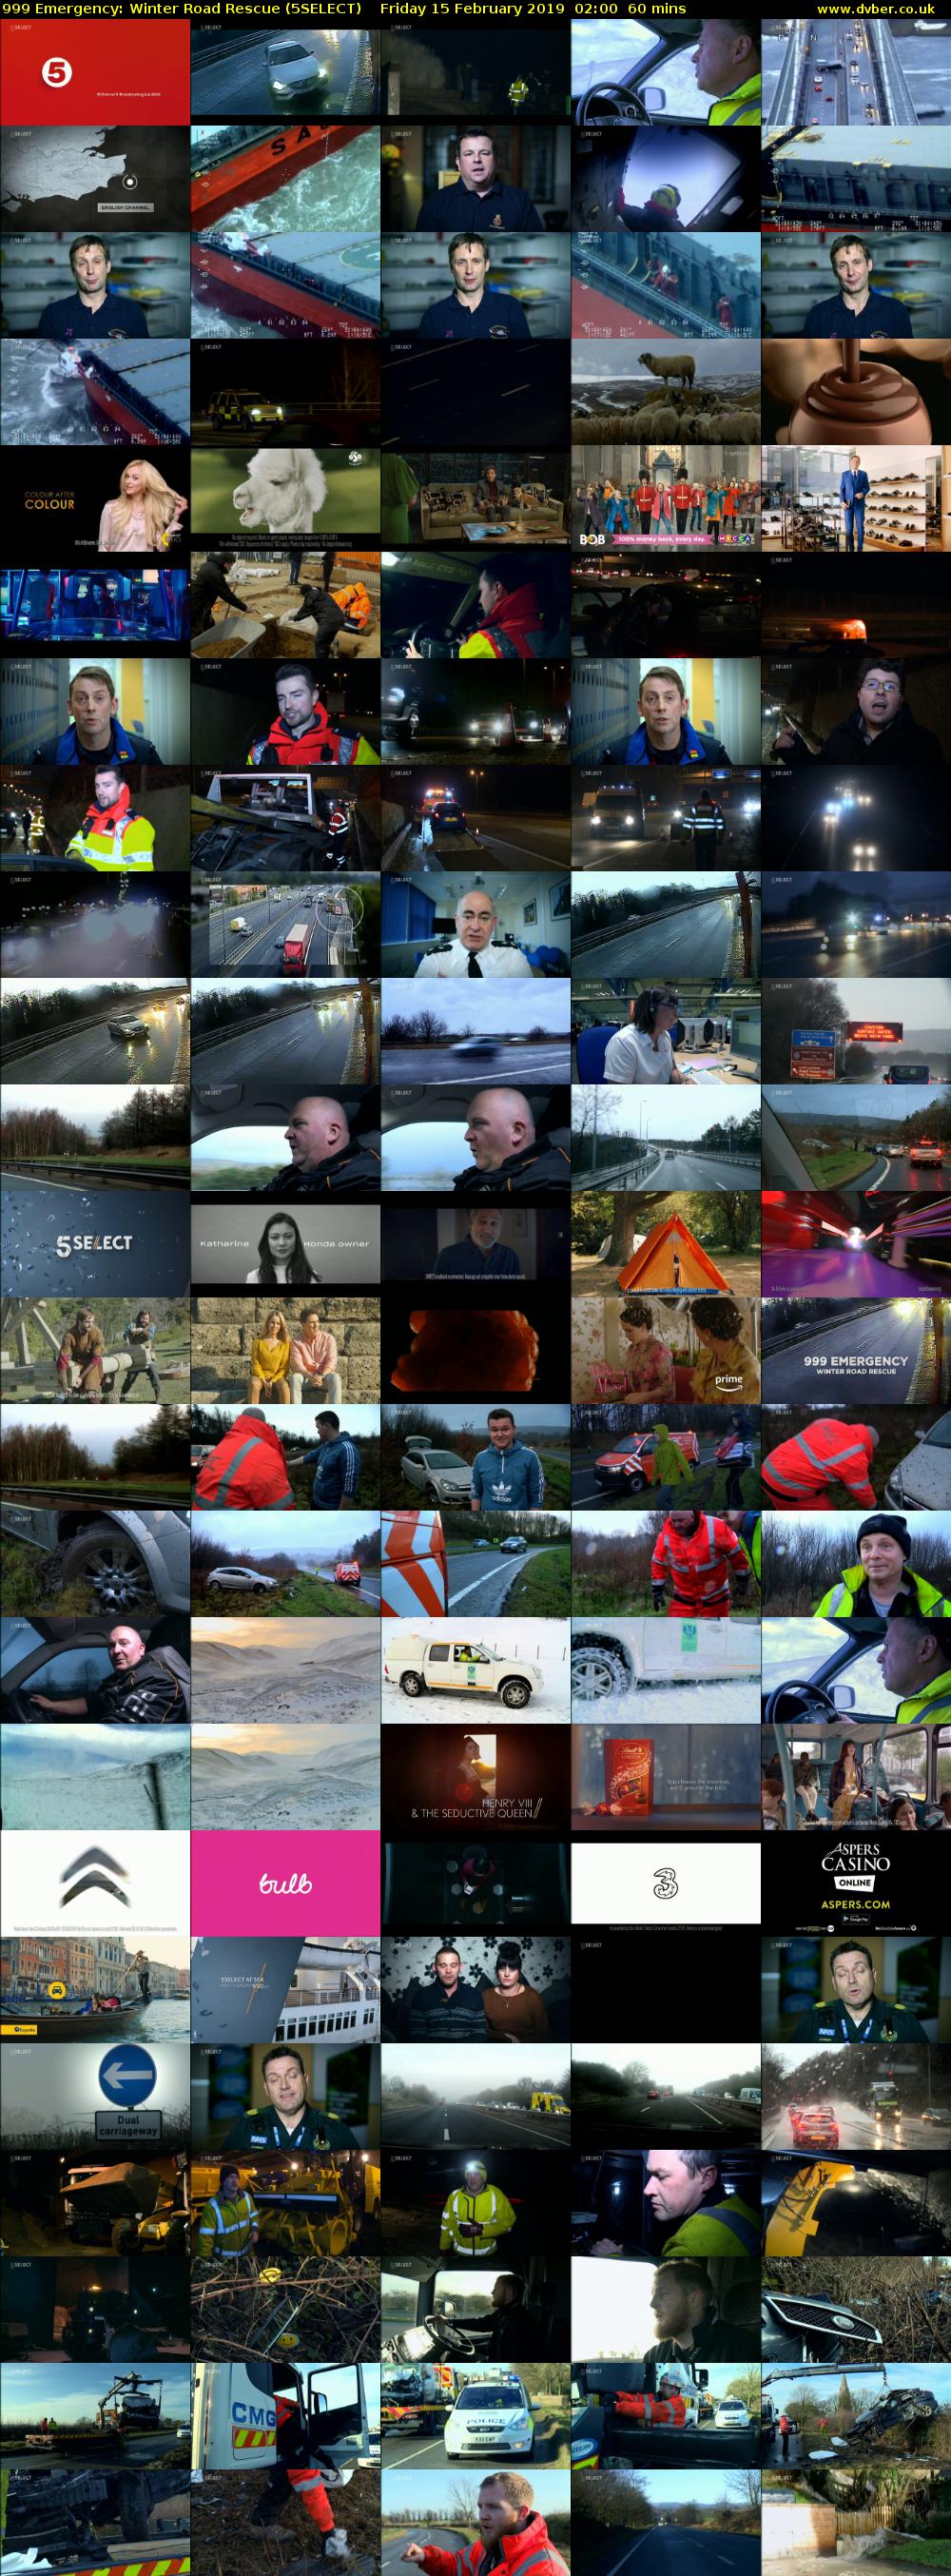 999 Emergency: Winter Road Rescue (5SELECT) Friday 15 February 2019 02:00 - 03:00